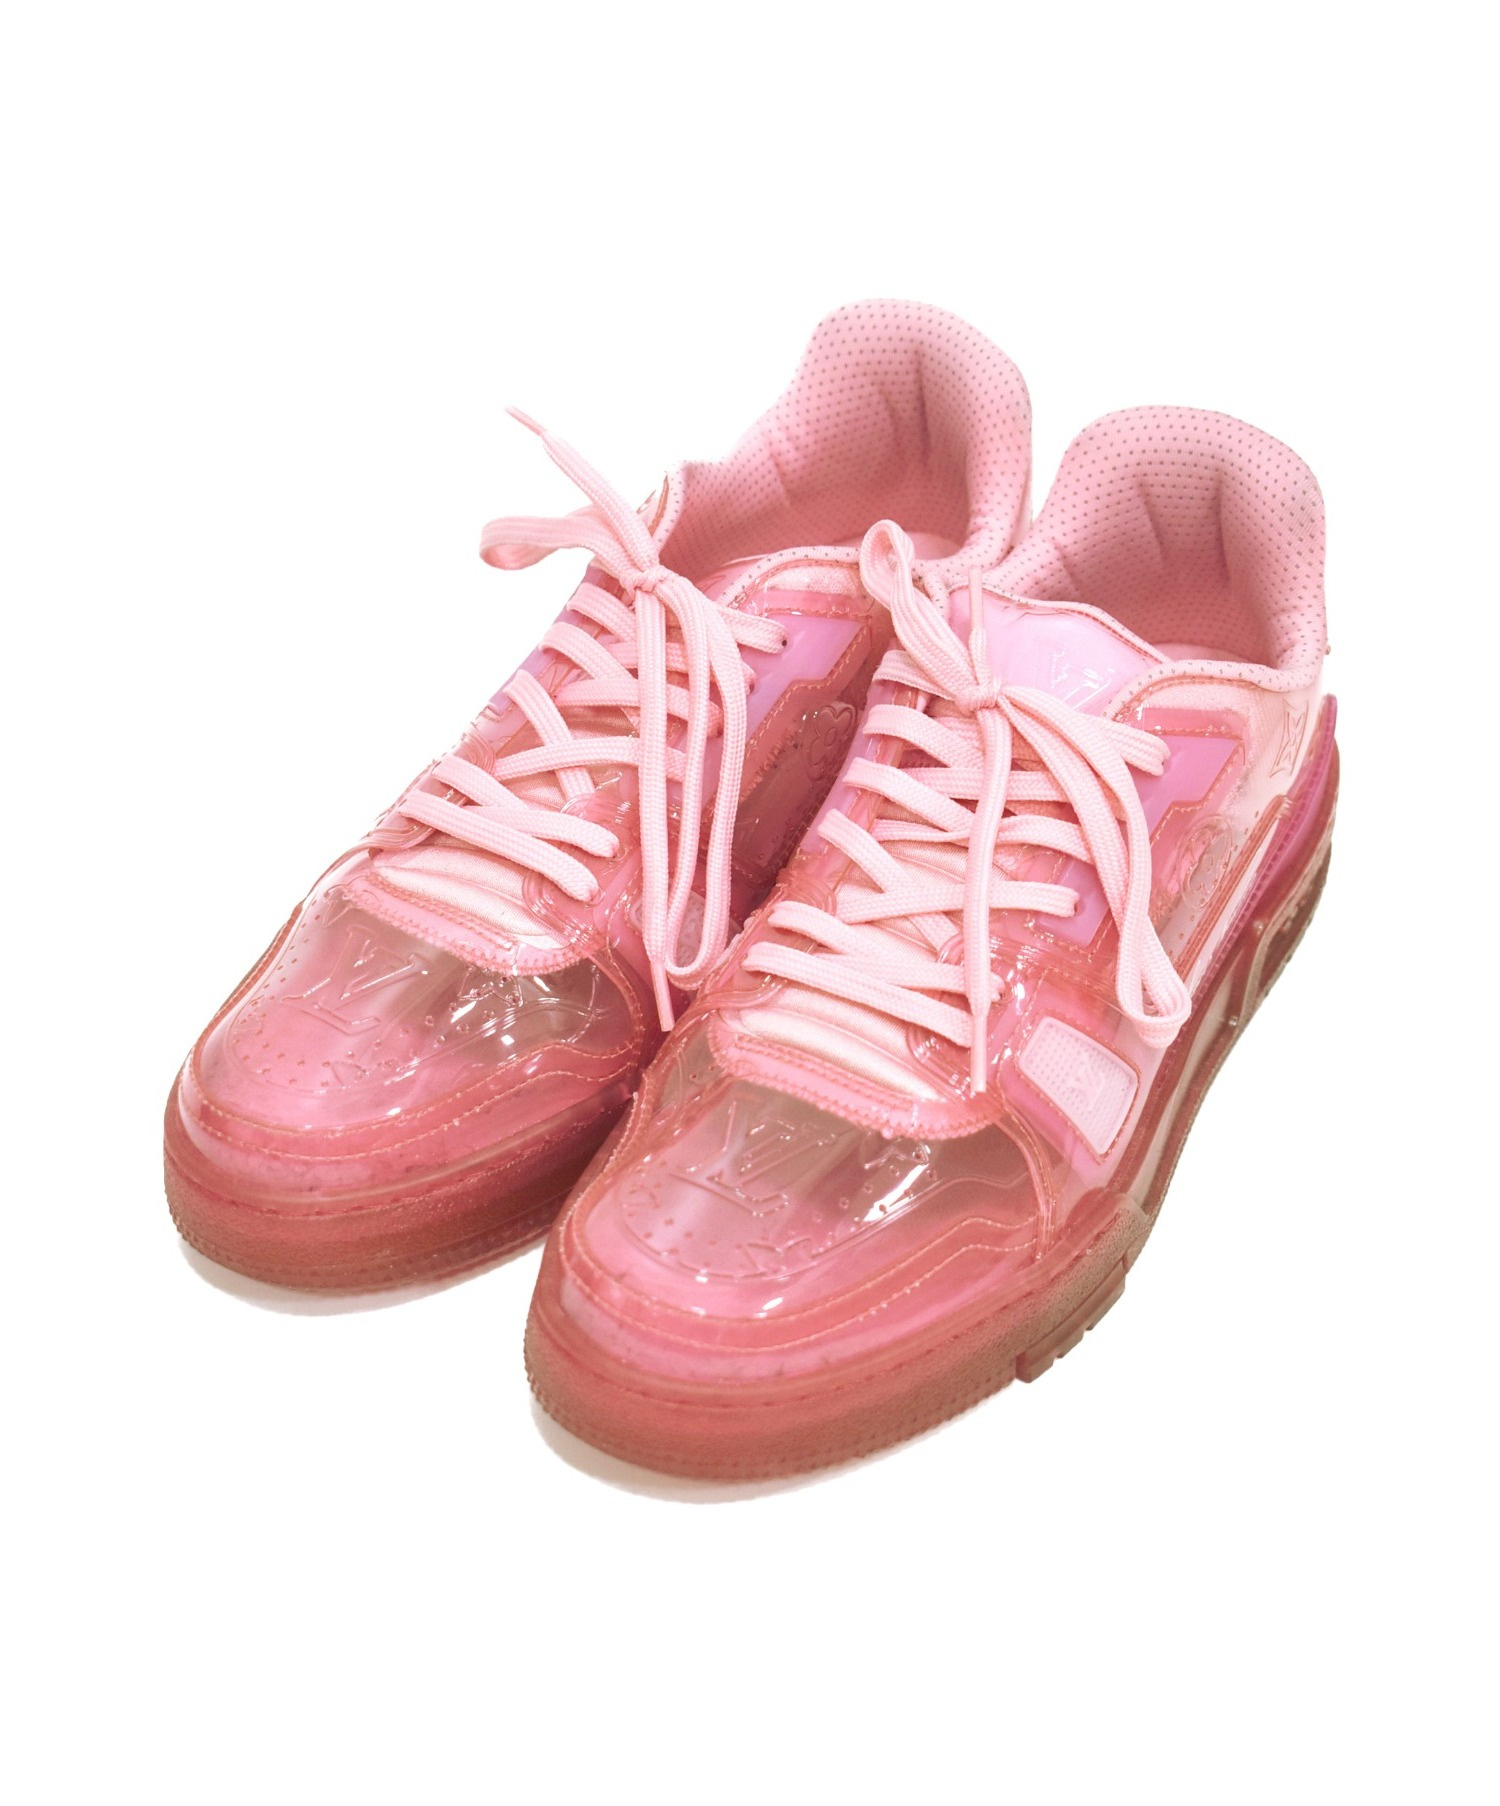 LOUIS VUITTON (ルイヴィトン) トレイナーラインスニーカー ピンク サイズ:7 1/2 GO 1210 1A5YQV Trainer  Line Sneakers